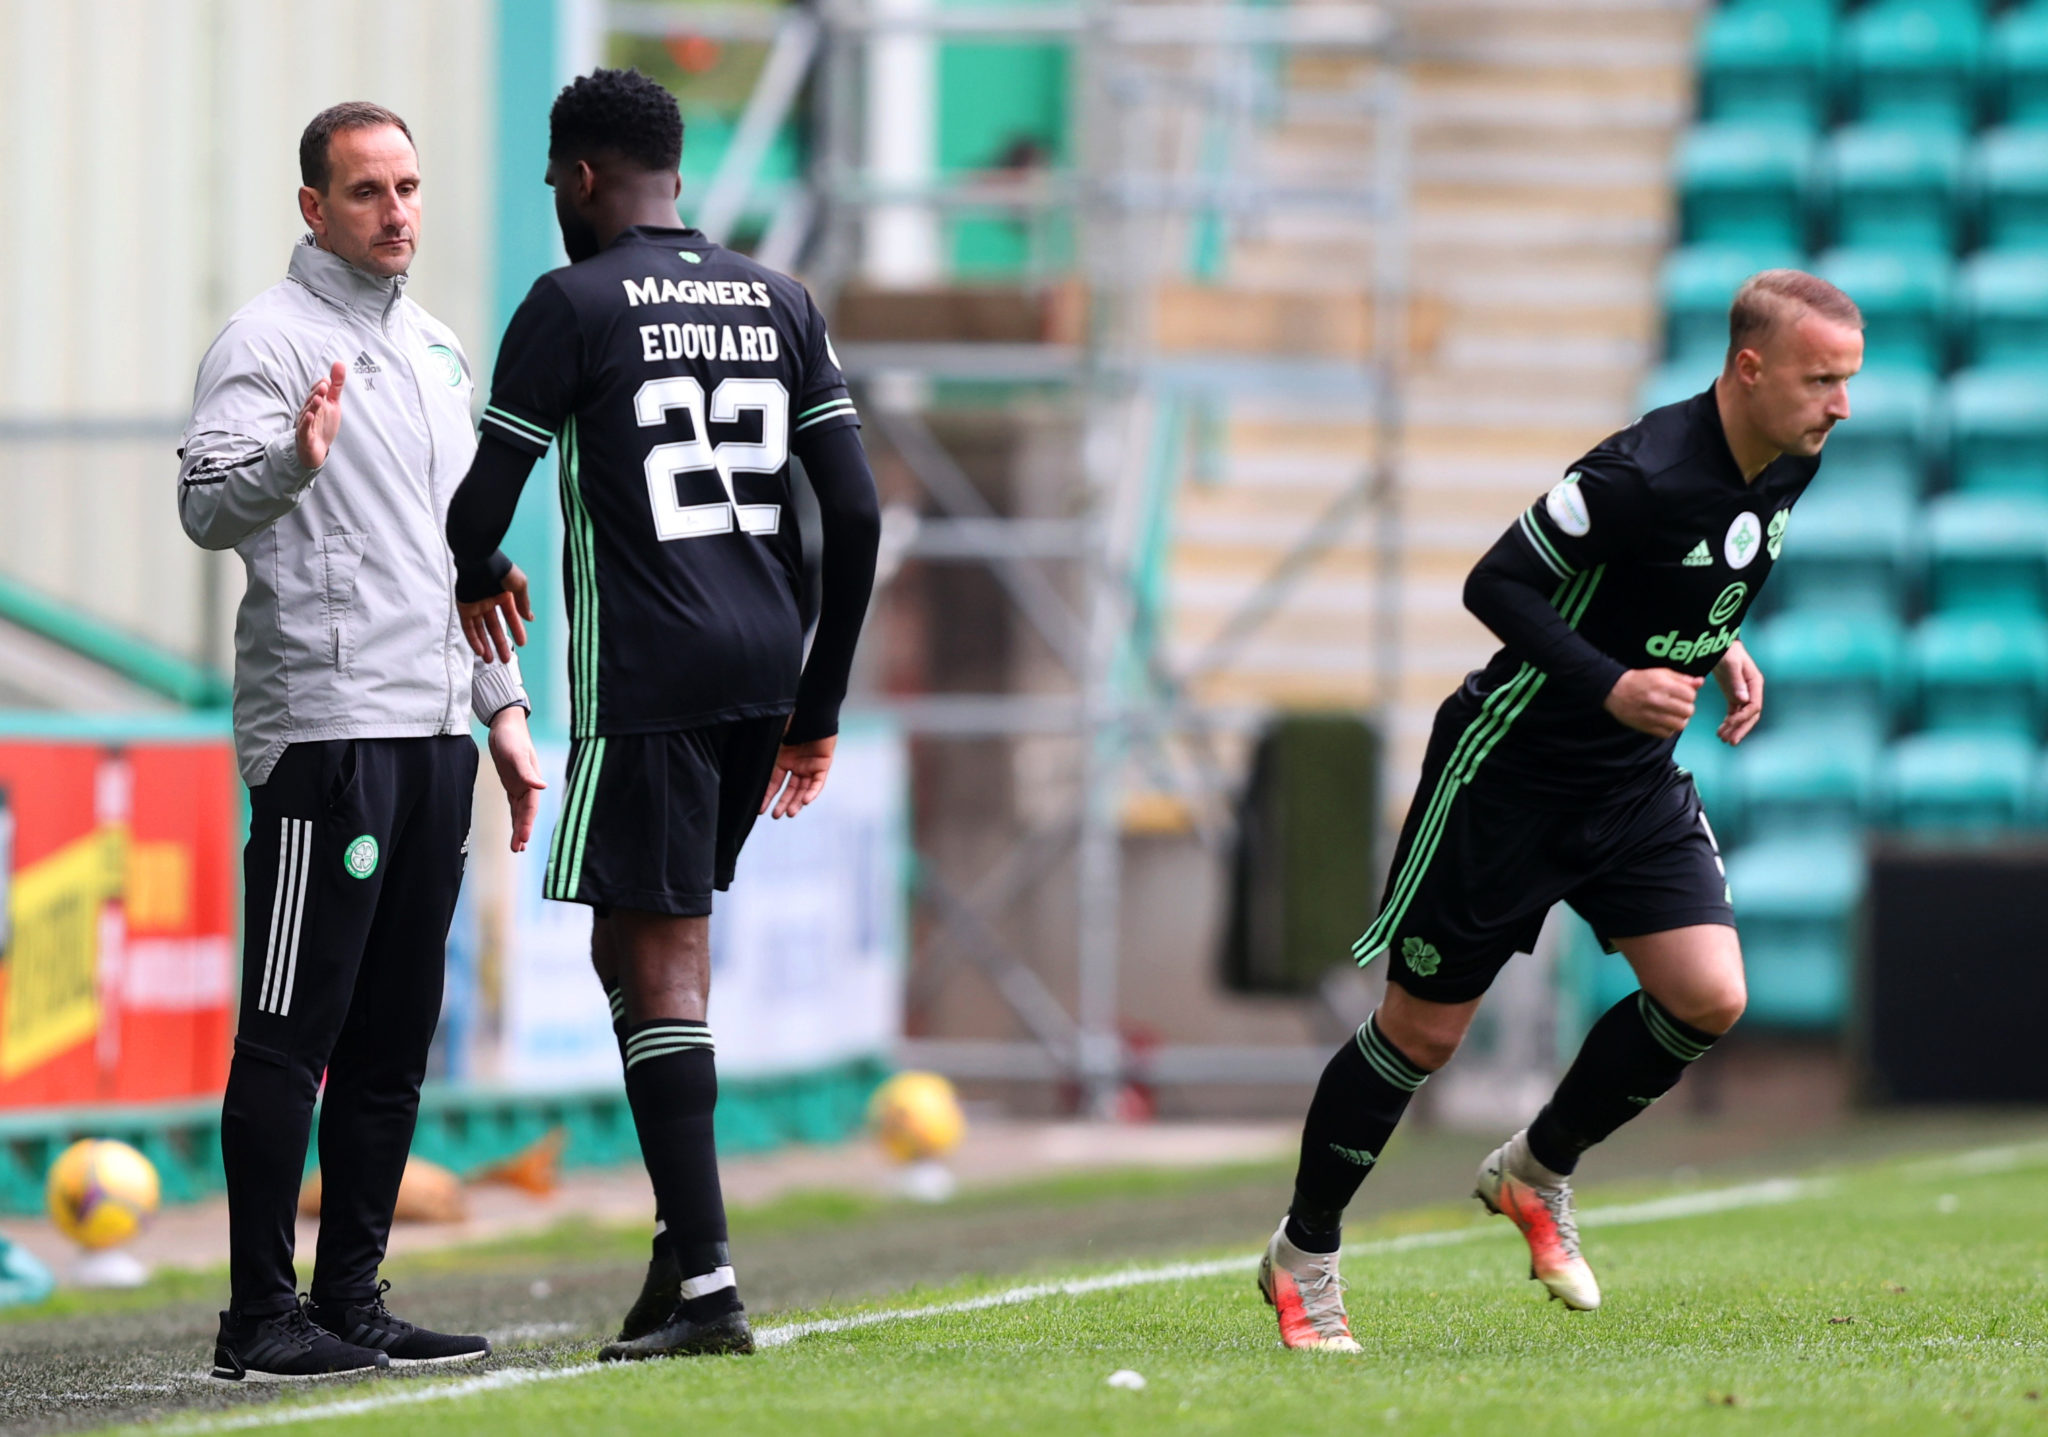 Leigh Griffiths replaces Odsonne Edouard